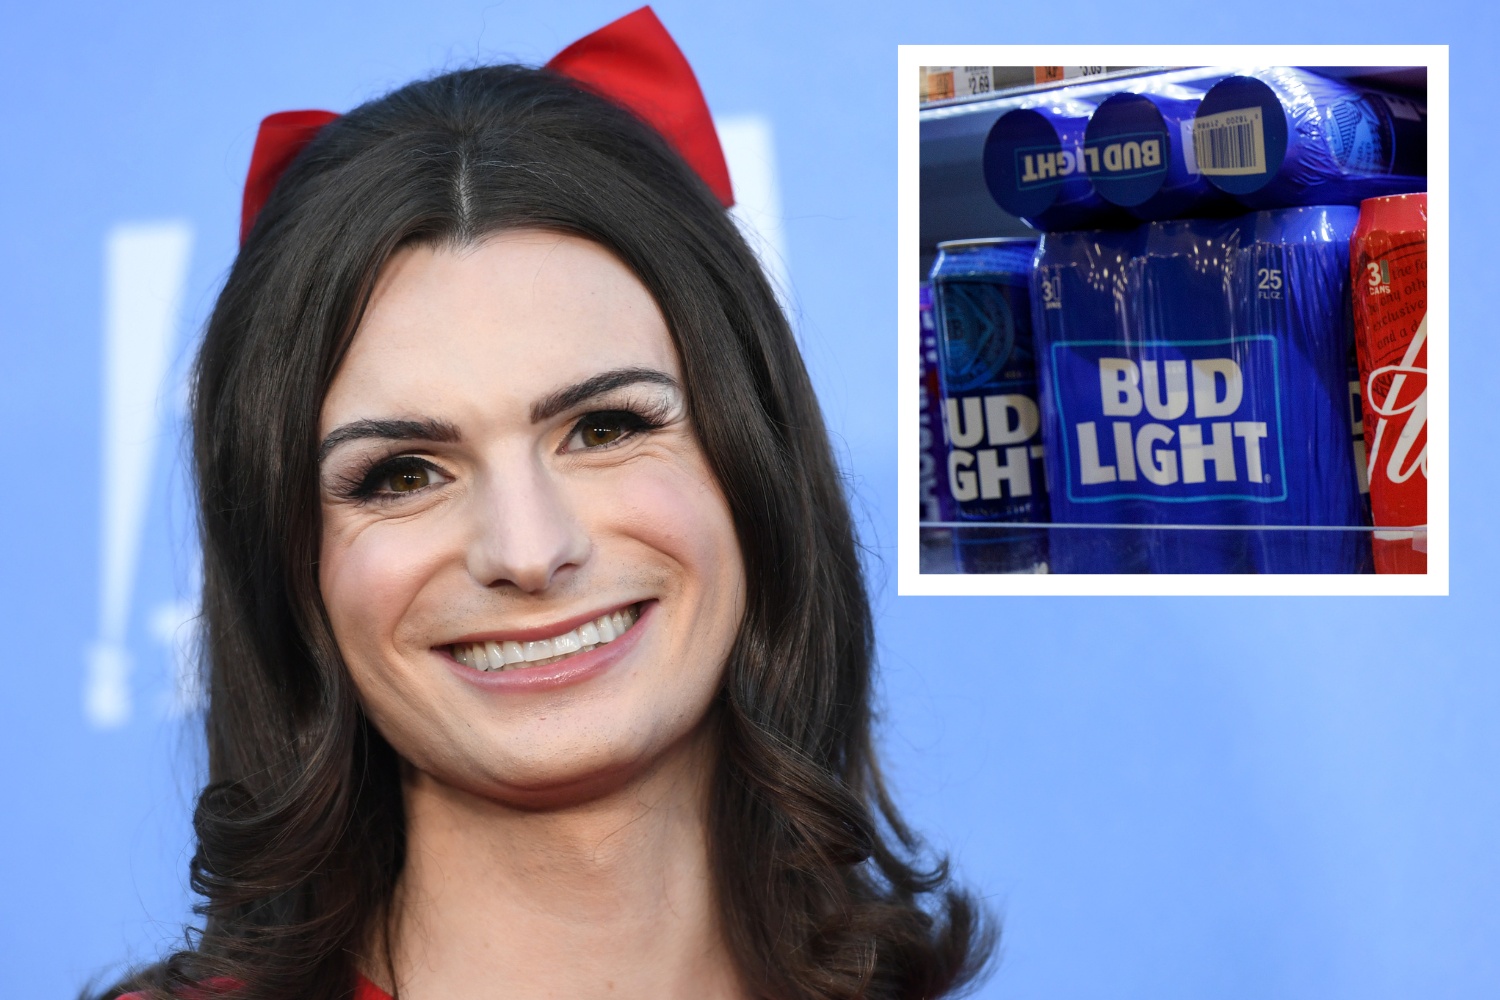 Video of Bud Light Untouched in Store Goes Viral Amid Dylan Mulvaney Drama